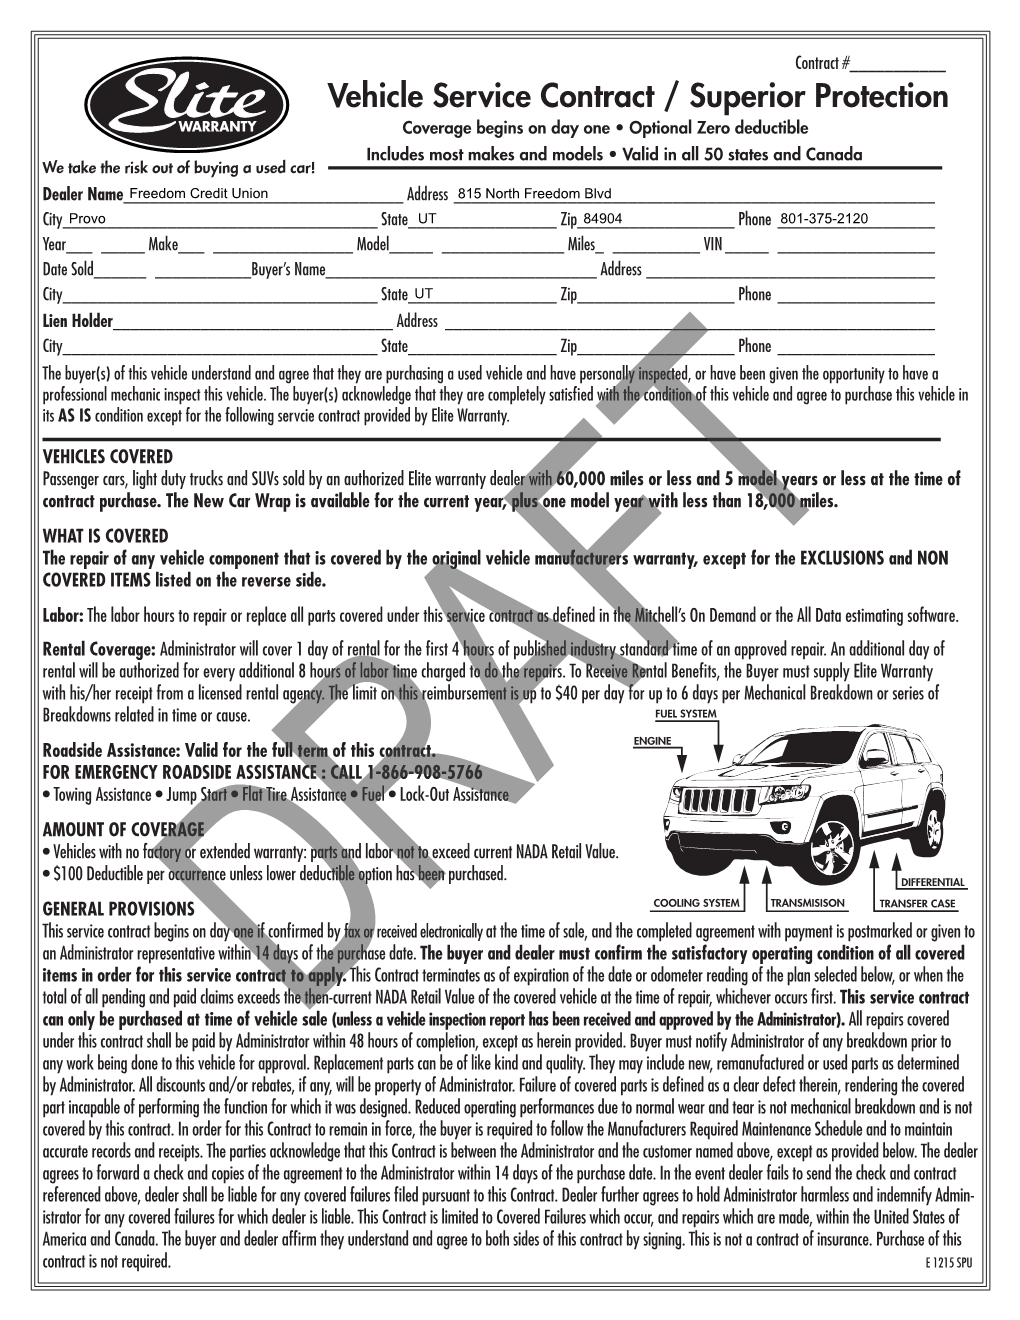 Vehicle Service Contract / Superior Protection